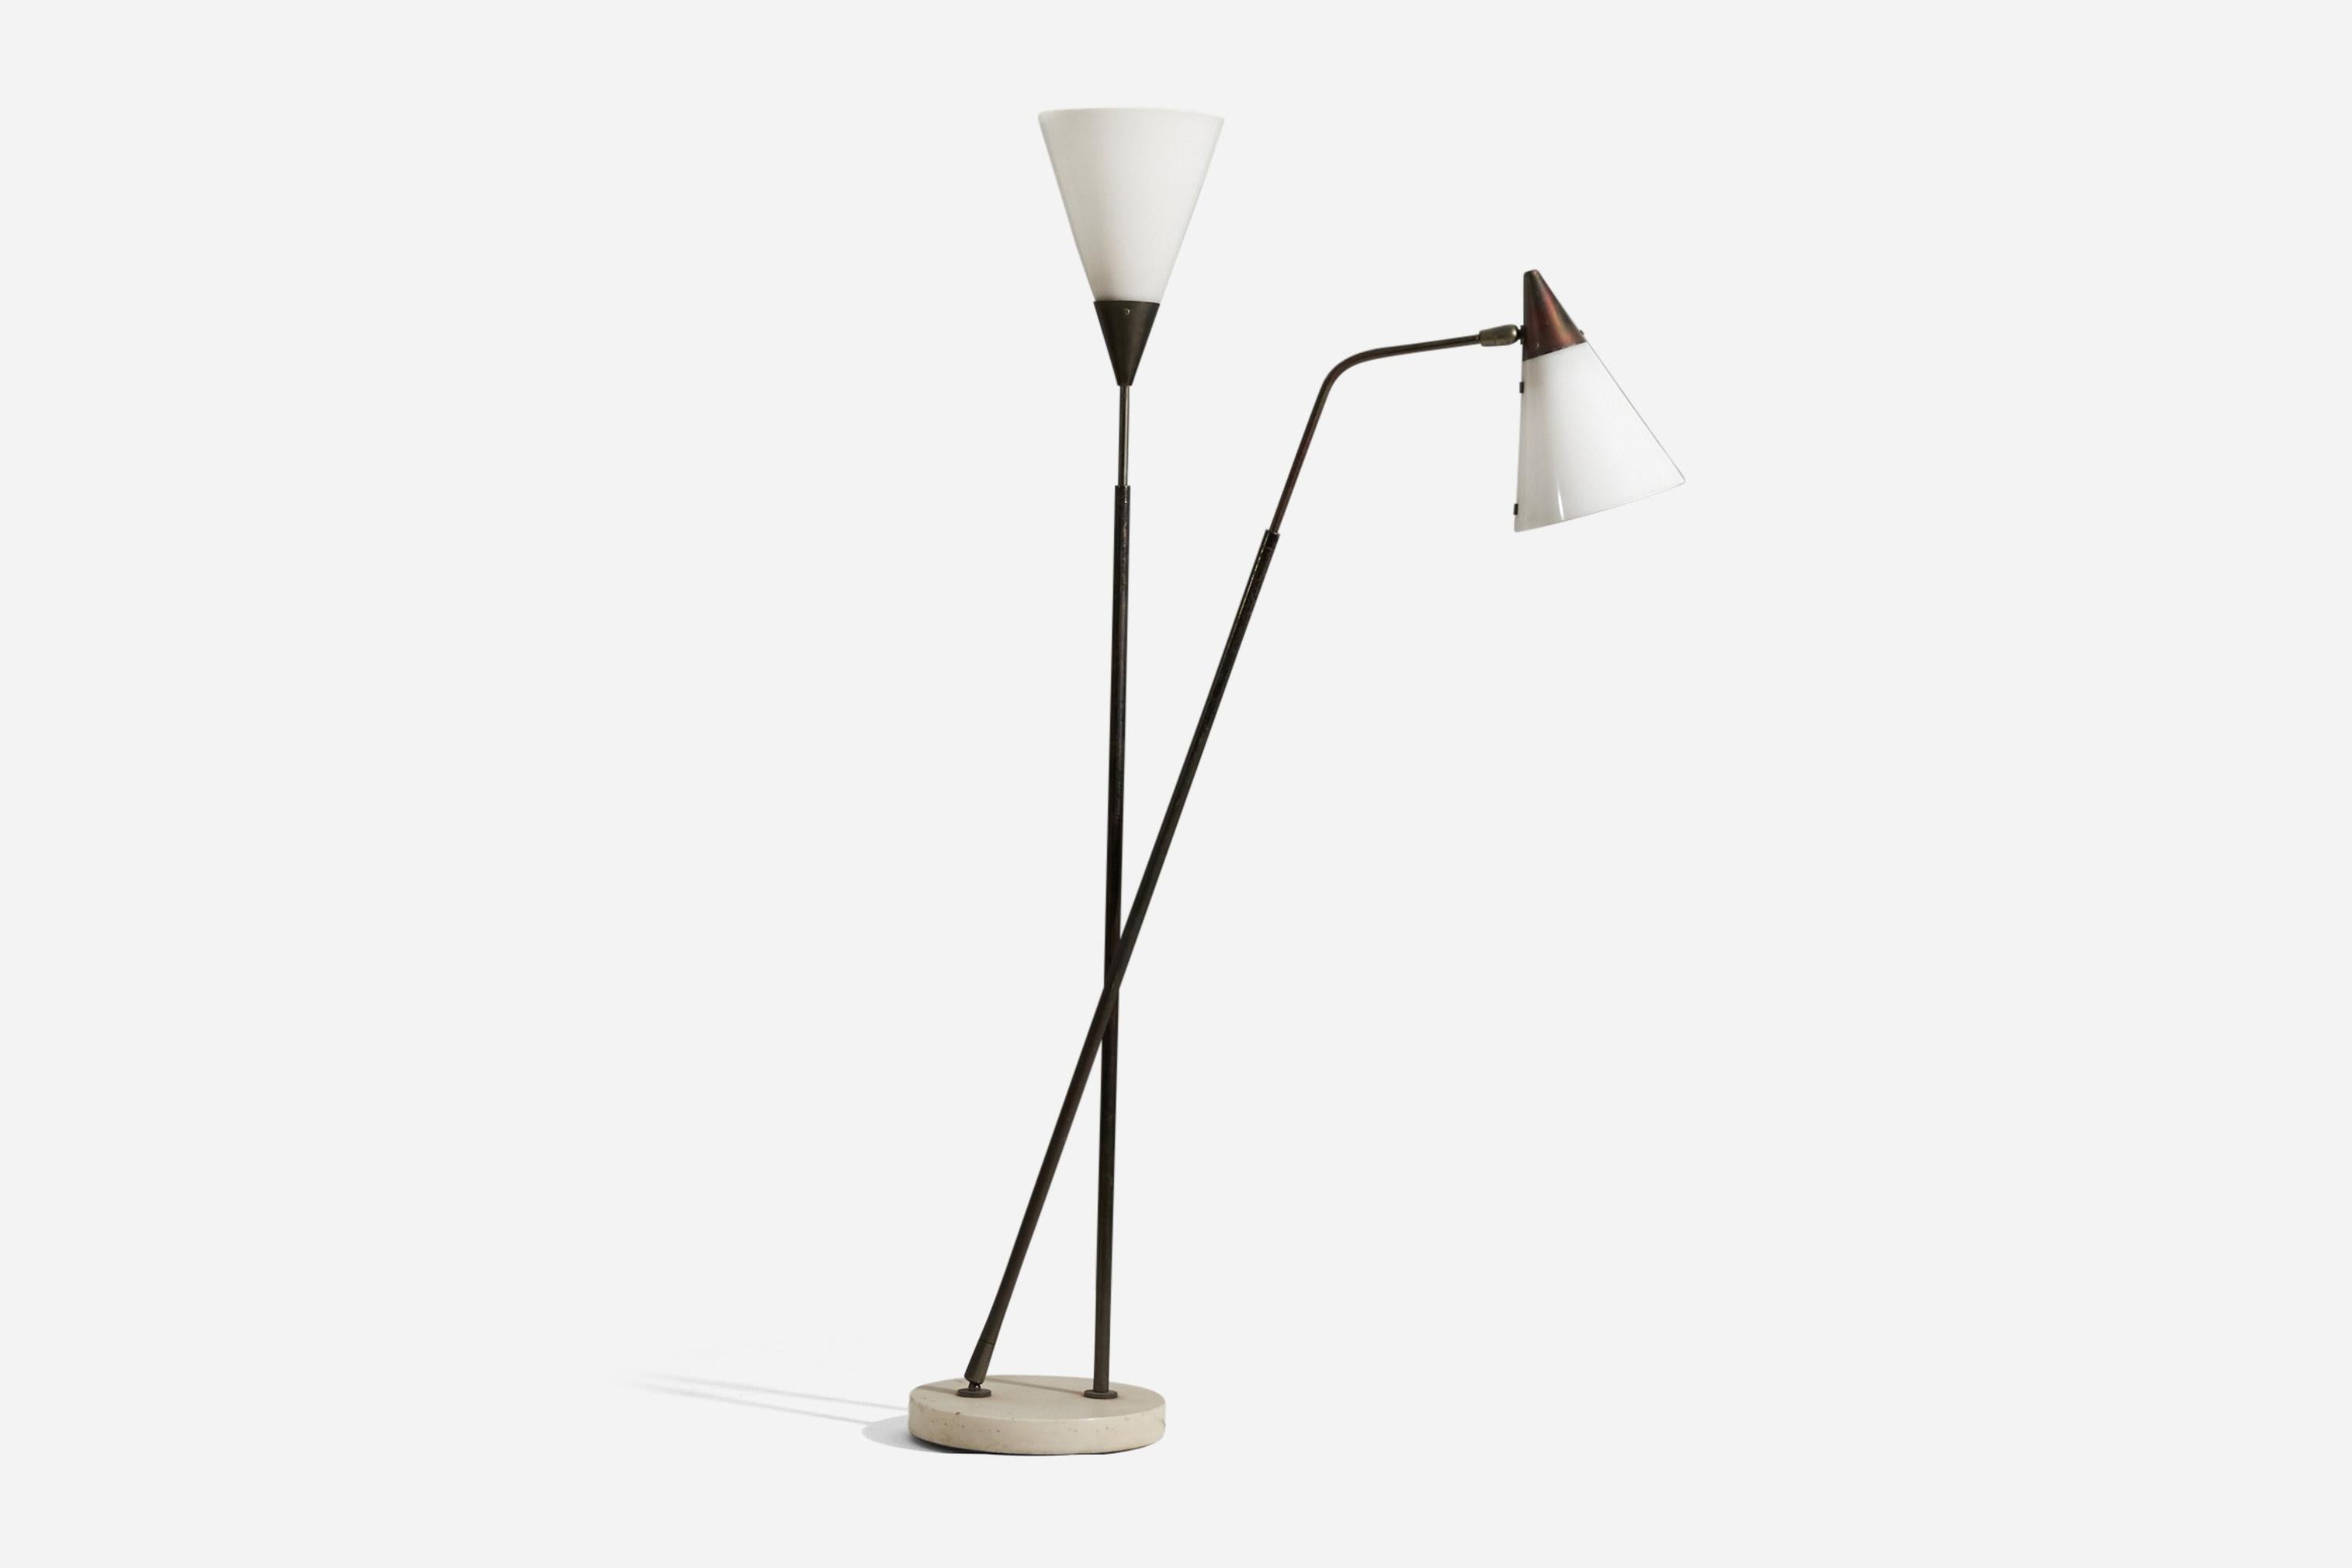 A rare model two-armed adjustable functionalist floor lamp. Designed by Guiseppe Ostuni and produced by O-Luce, Italy, 1950s. Rare execution with original acrylic lampshades.

Other designers of the period working in similar style include Max